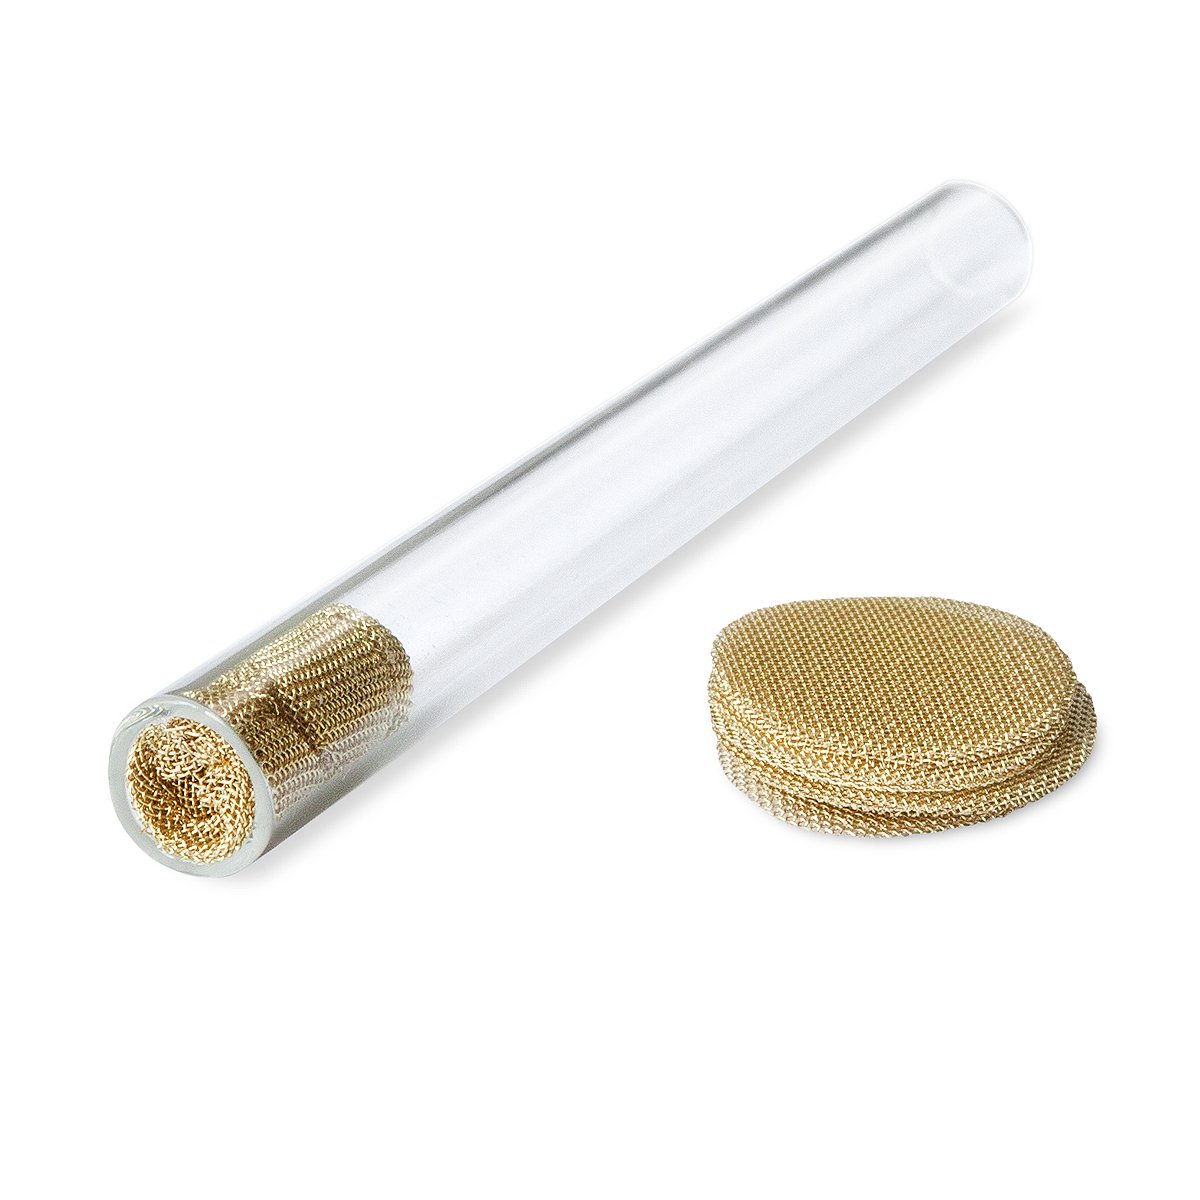 Simple Pipe Kit: Glass Pipe and Brass Gauzes,  in a Plastic Case